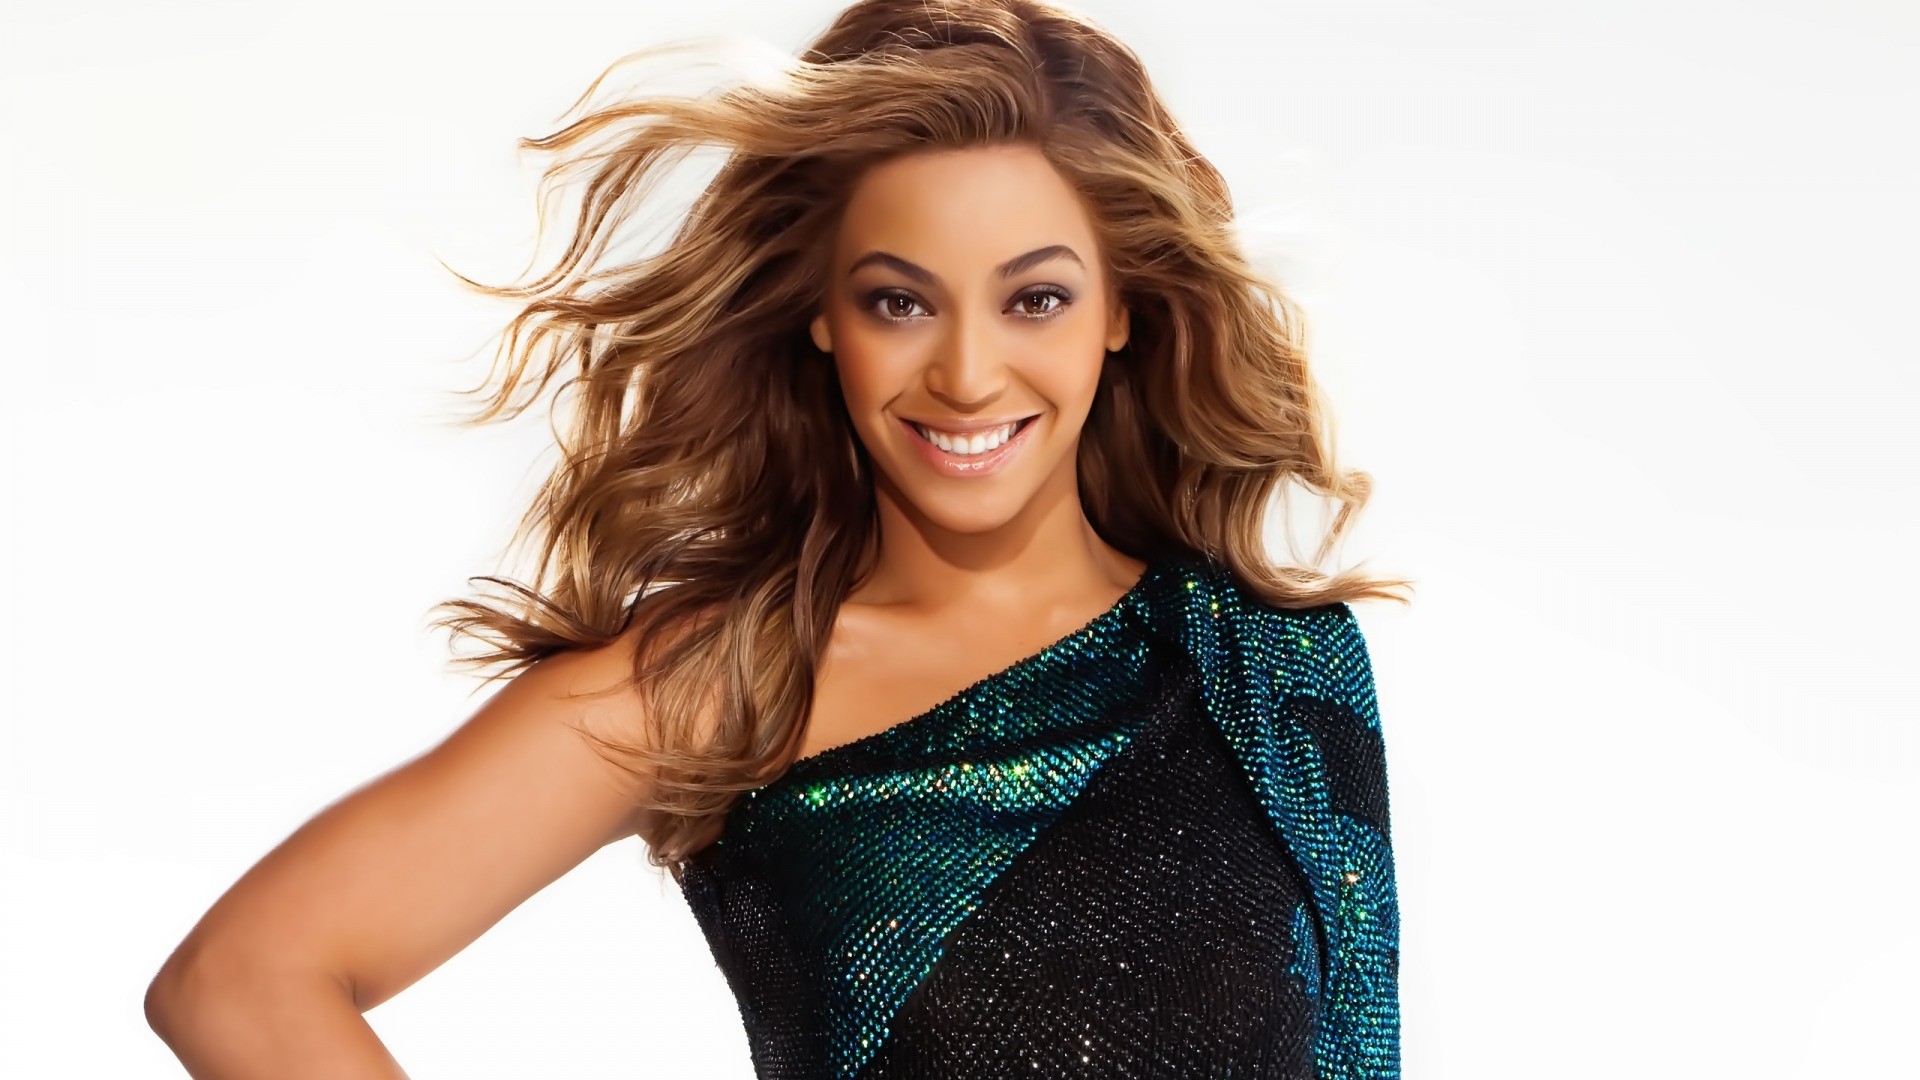 Beyonce Knowles 1 Arena Pile Top 10 Hottest Girls in The World